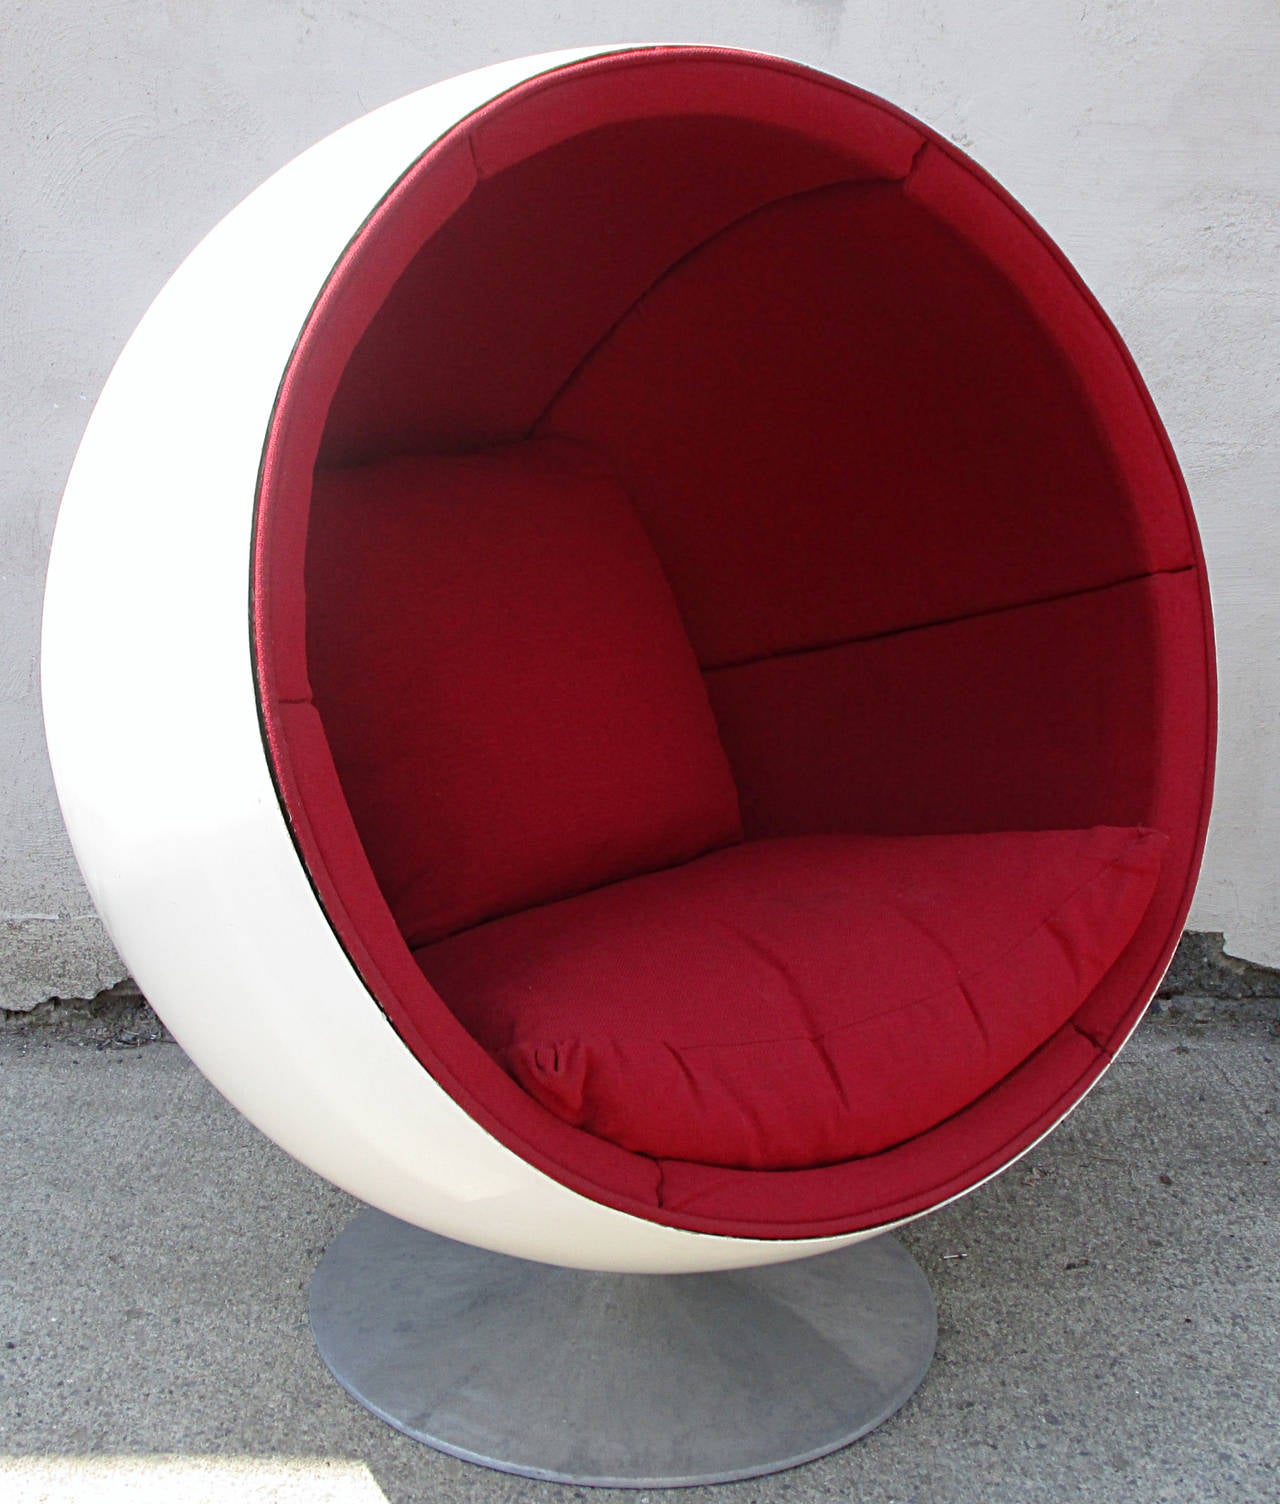 Iconic Eero Aarnio ball chair in white fiberglass on aluminum swivel pedestal base. This version most likely from the 1970s.